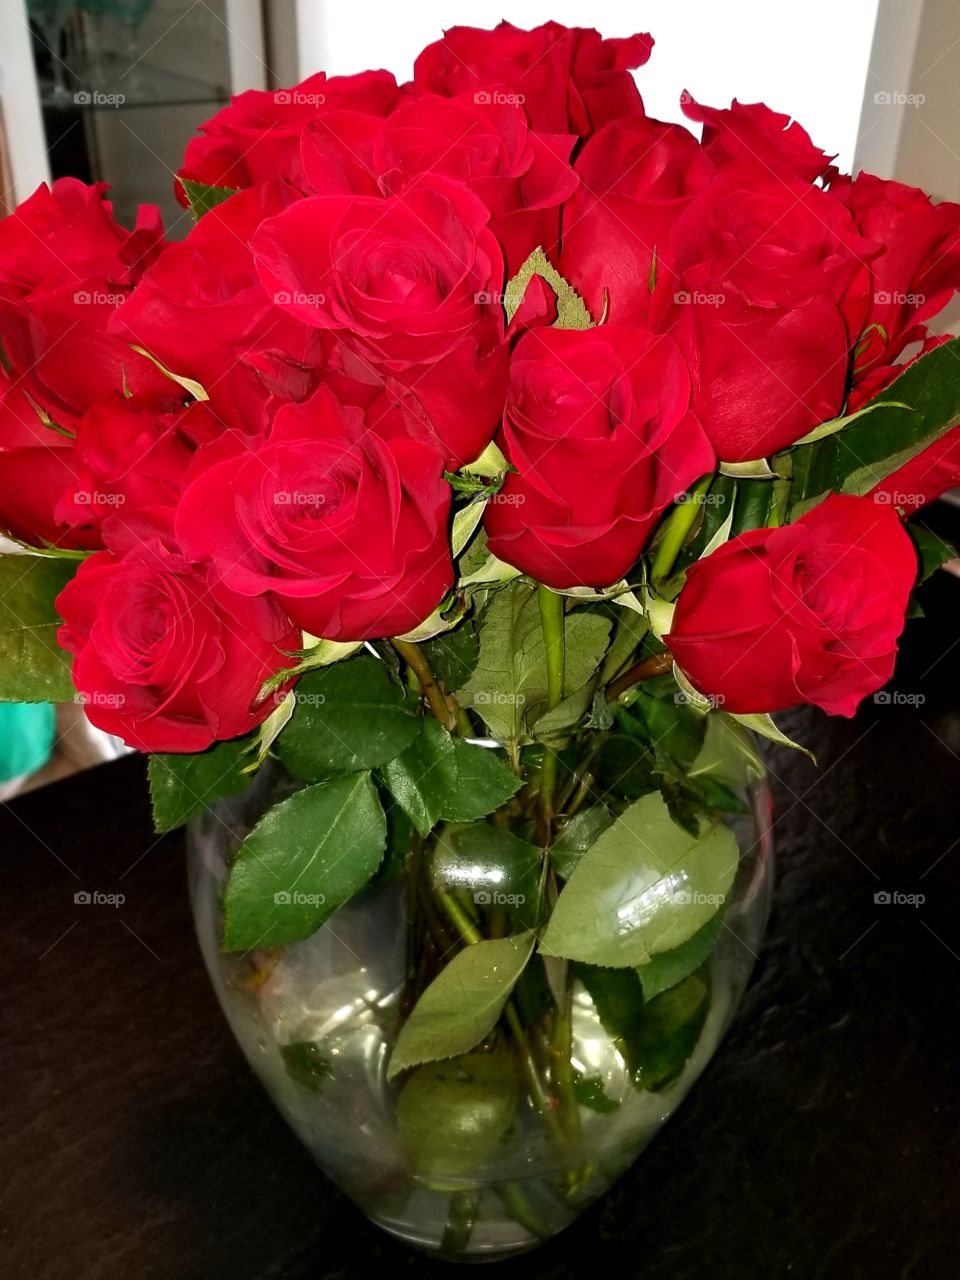 Valentine's Day red roses